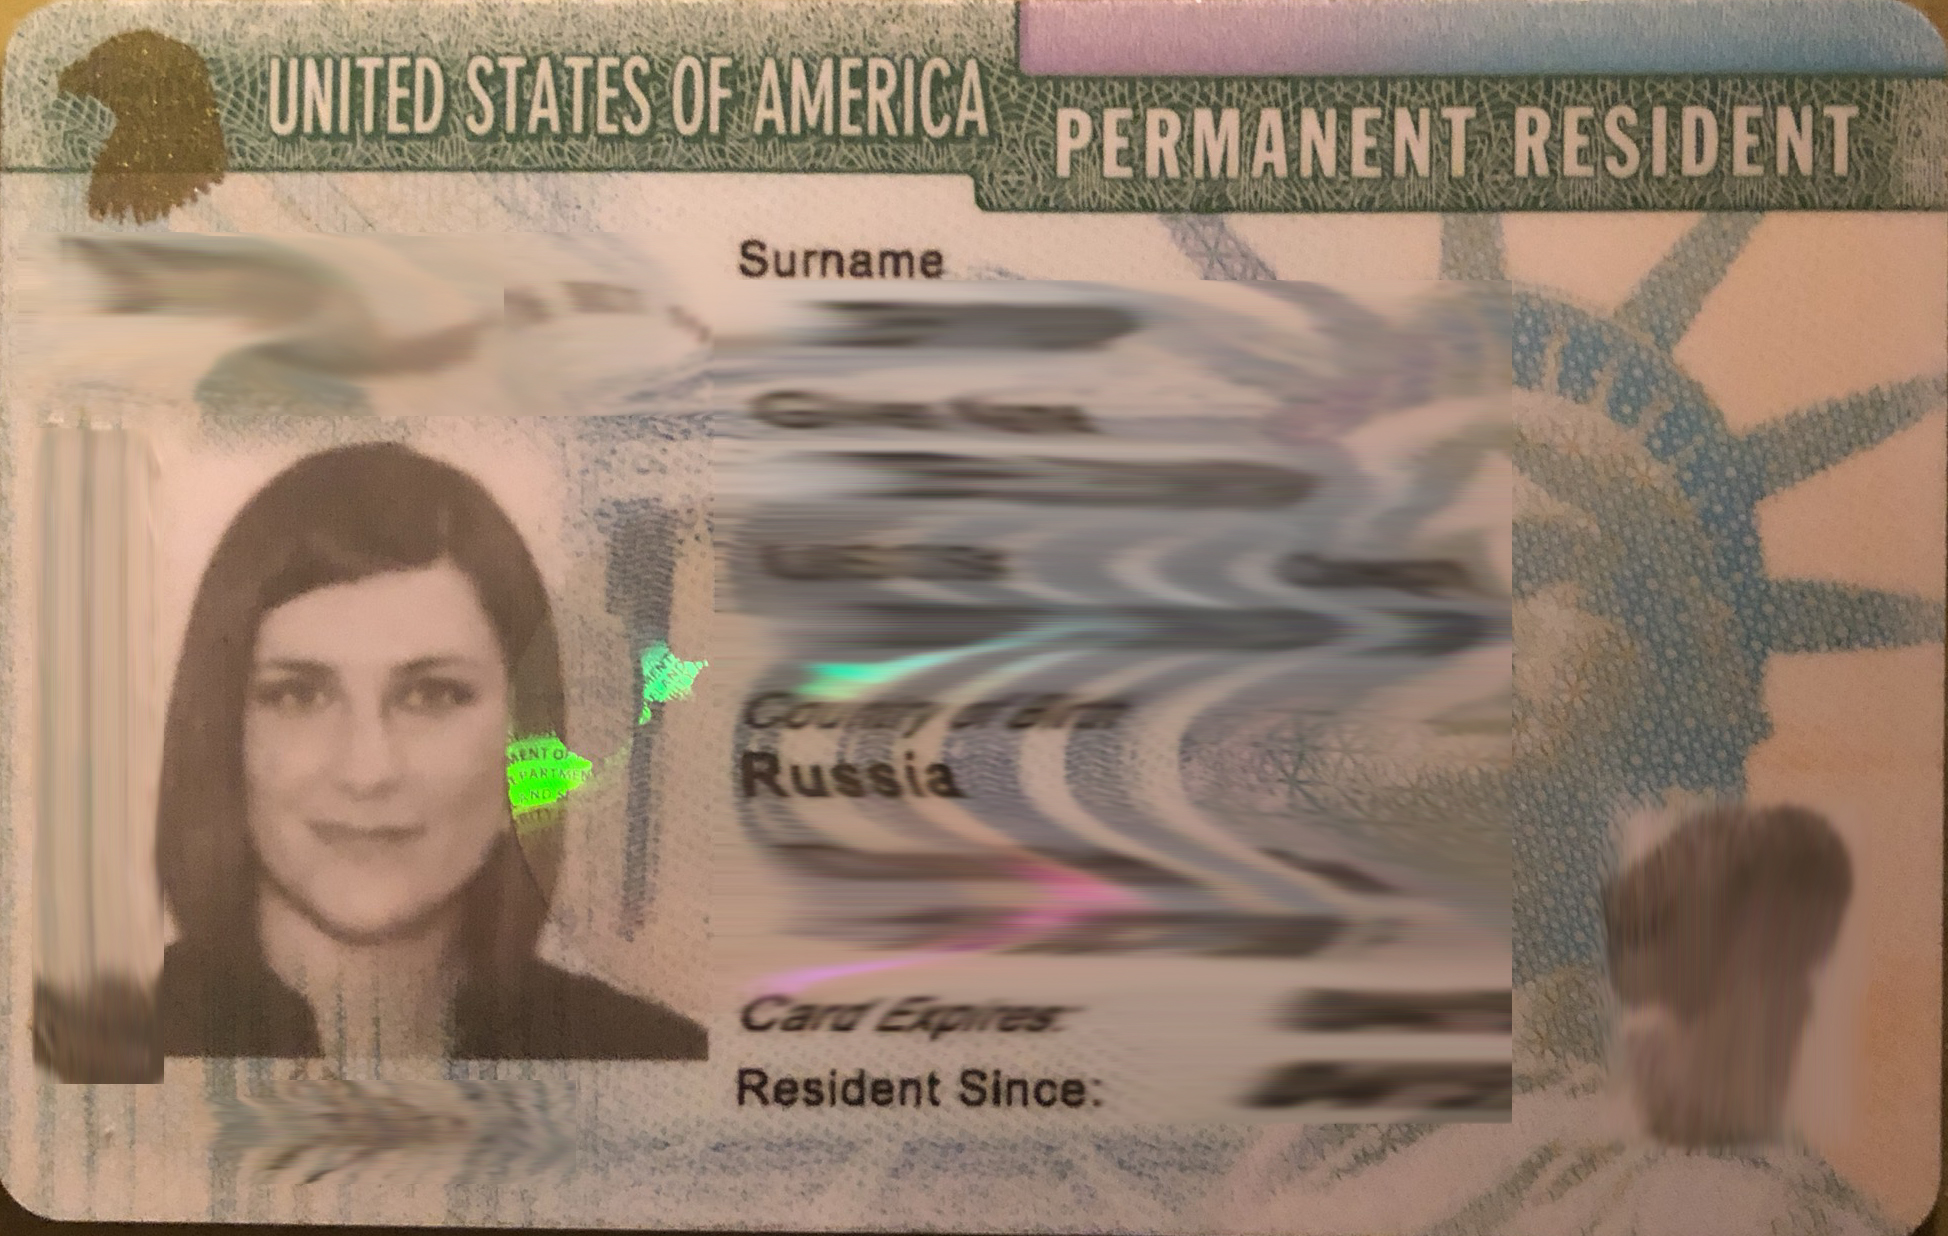 What’s After 5 Years of Lawful Permanent Residency?